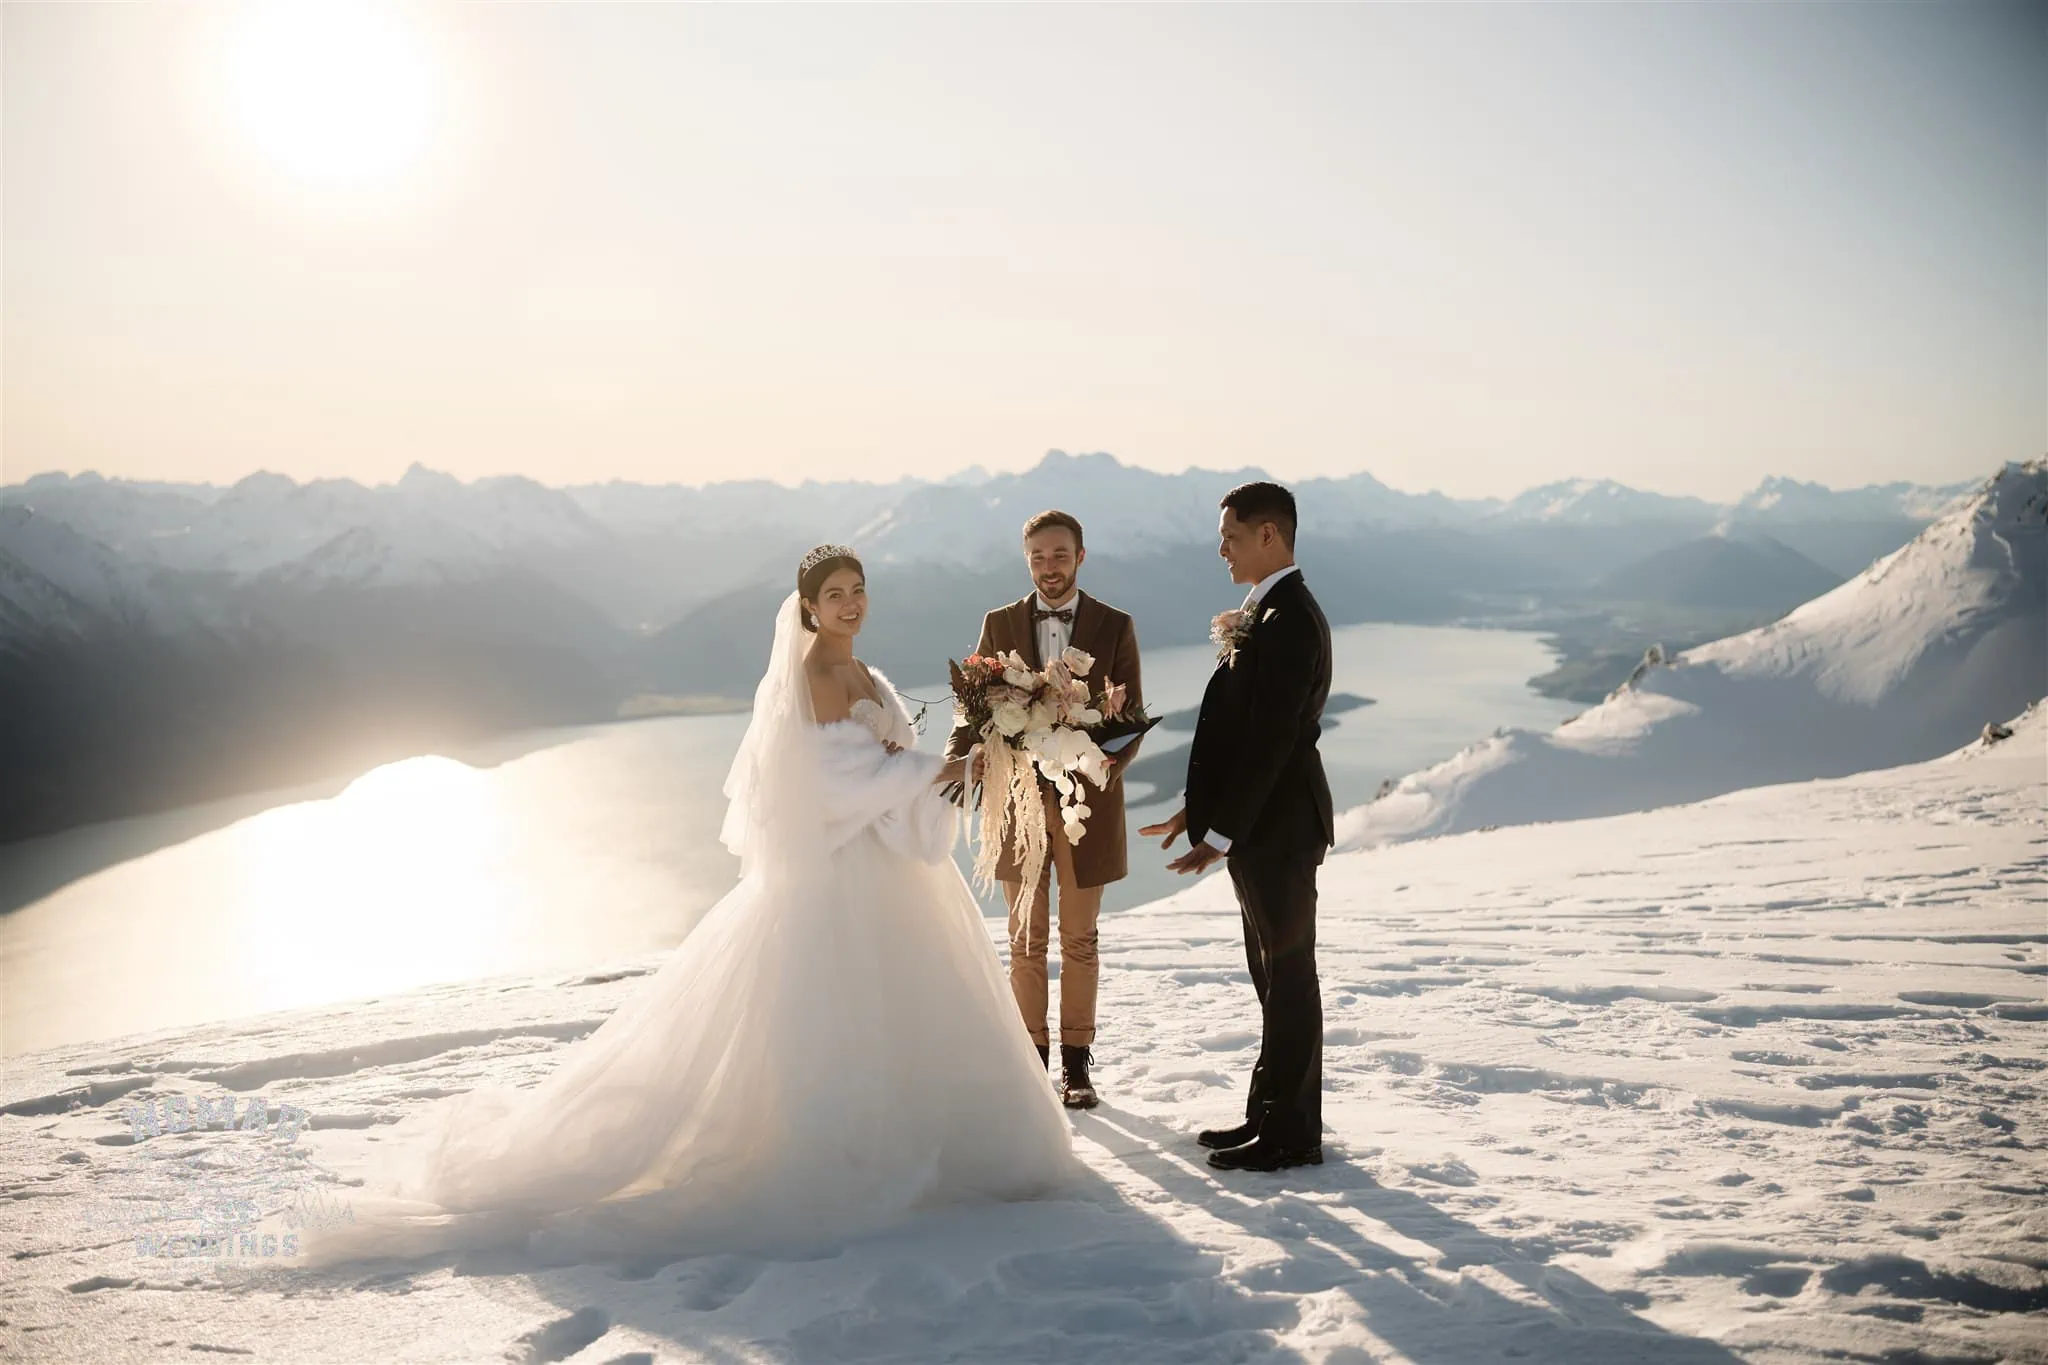 A couple's snowy mountaintop wedding at Mt Creighton in Queenstown, NZ.